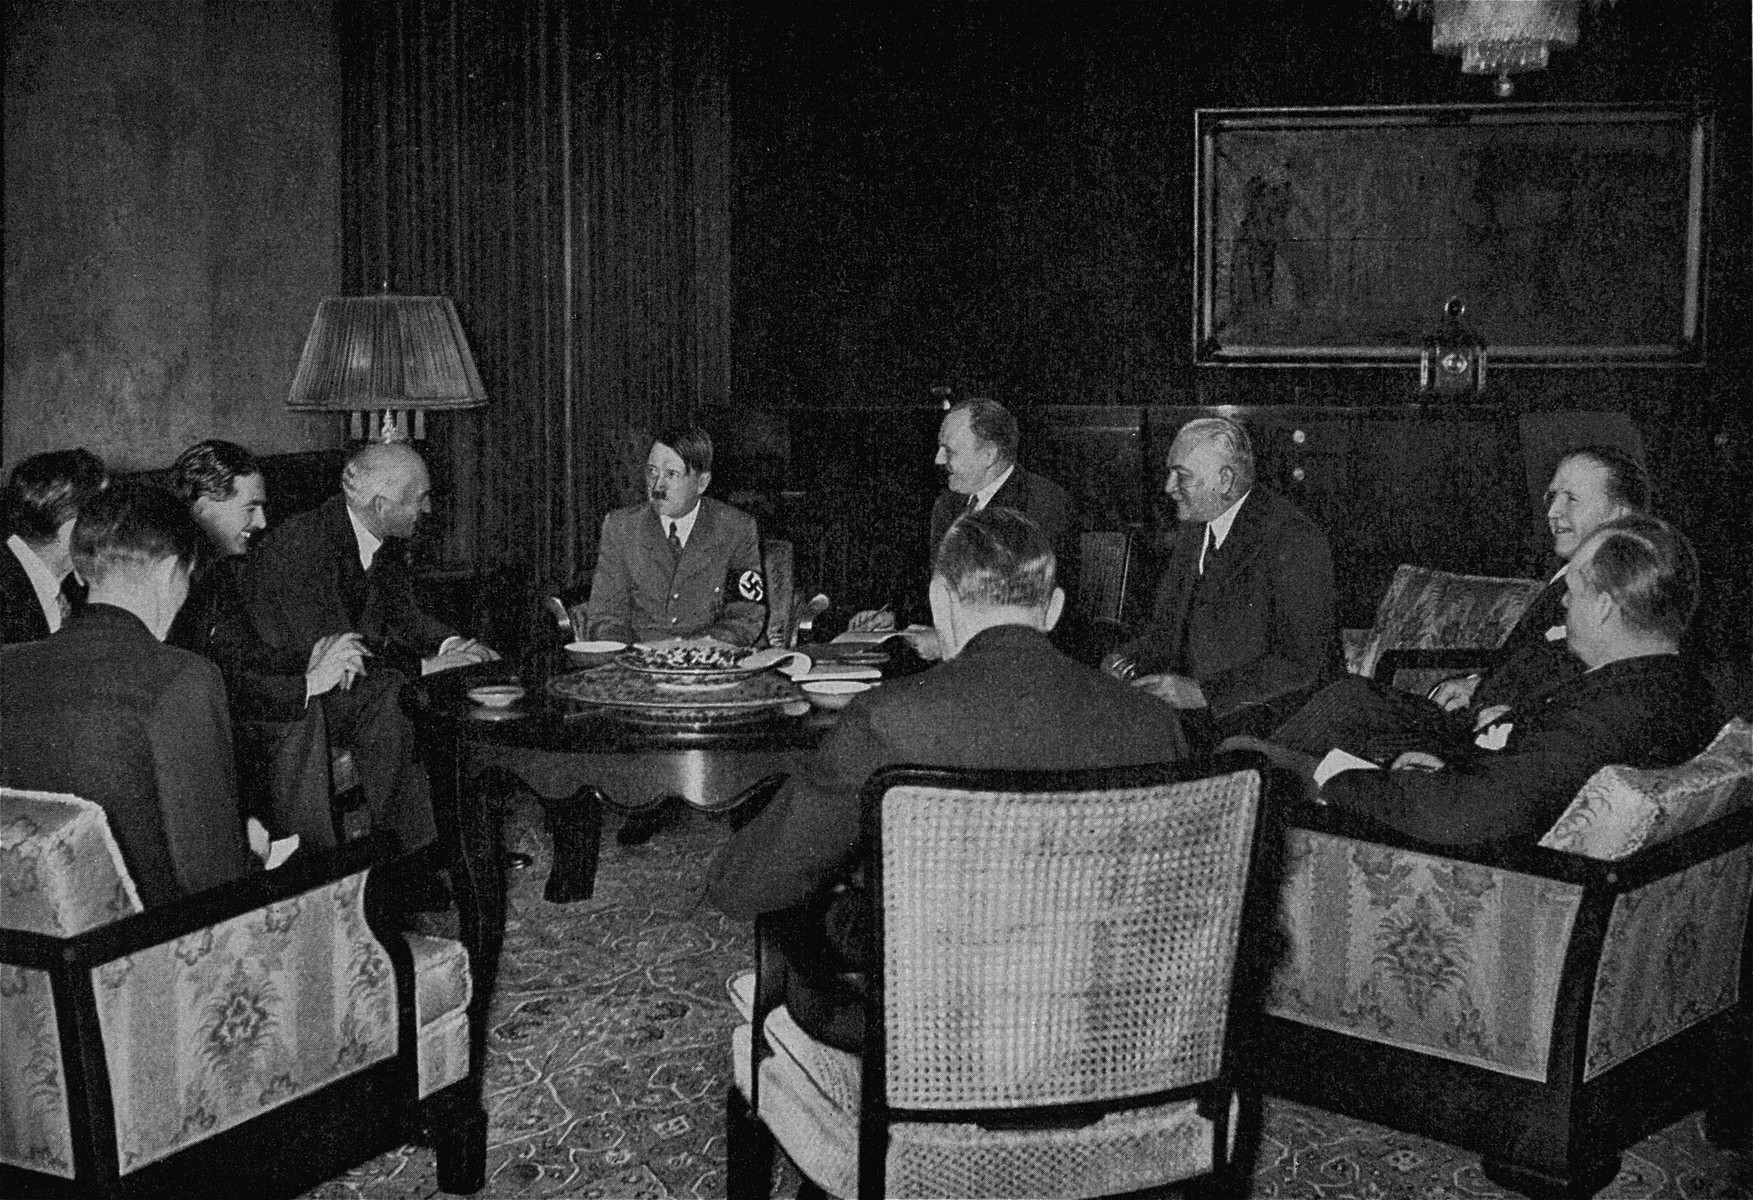 British government delegation headed by Anthony Eden (fourth from left) and Sir John Simon, meets with Adolf Hitler.